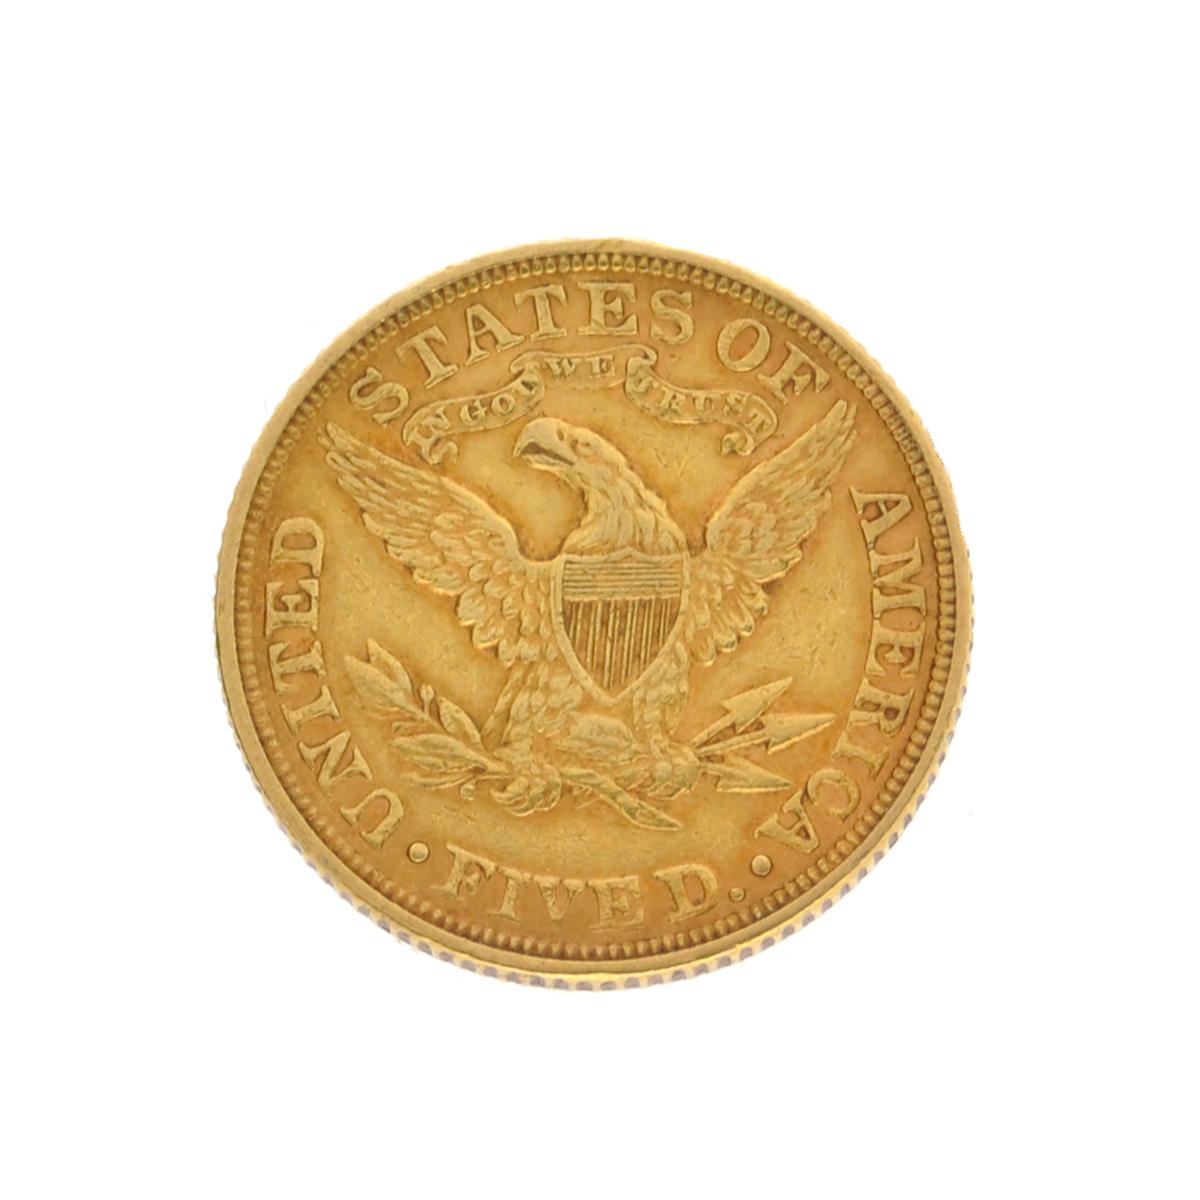 Extremely Rare 1895 $5 U.S. Liberty Head Gold Coin